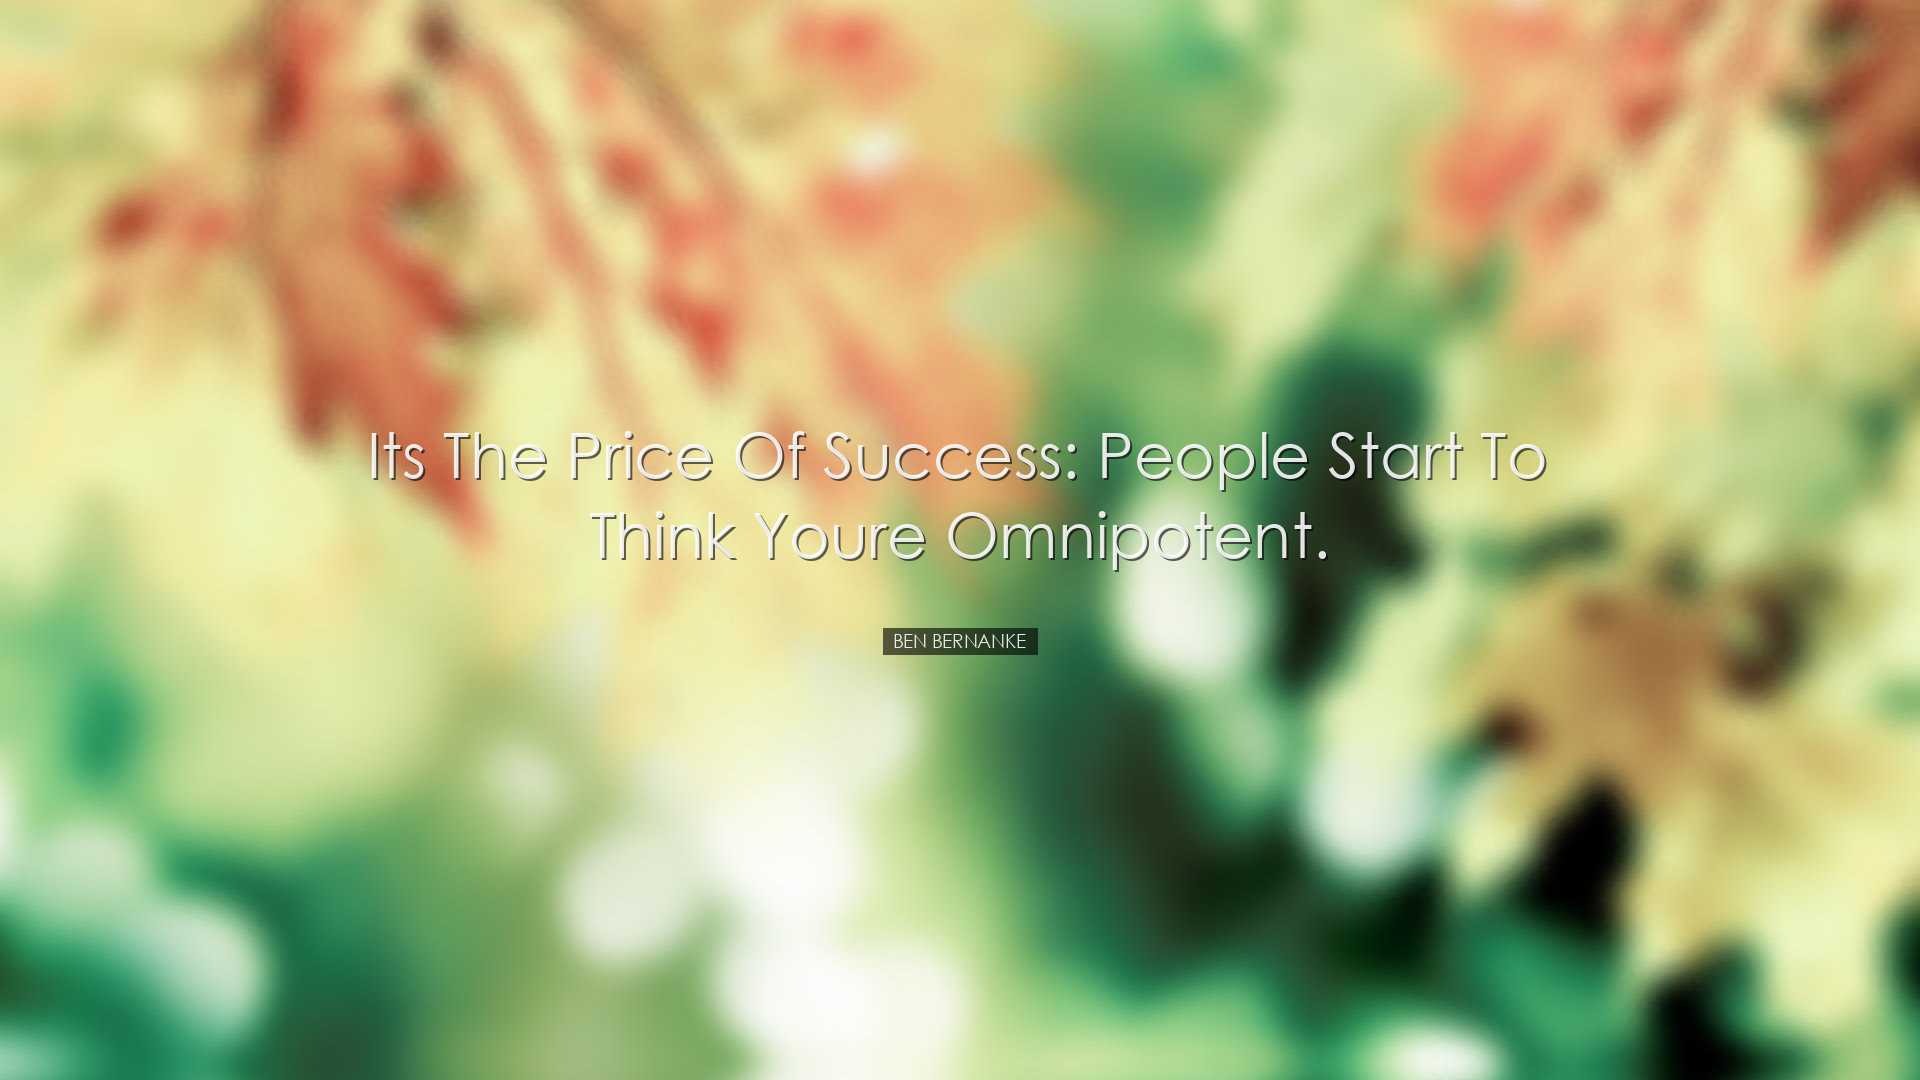 Its the price of success: people start to think youre omnipotent.